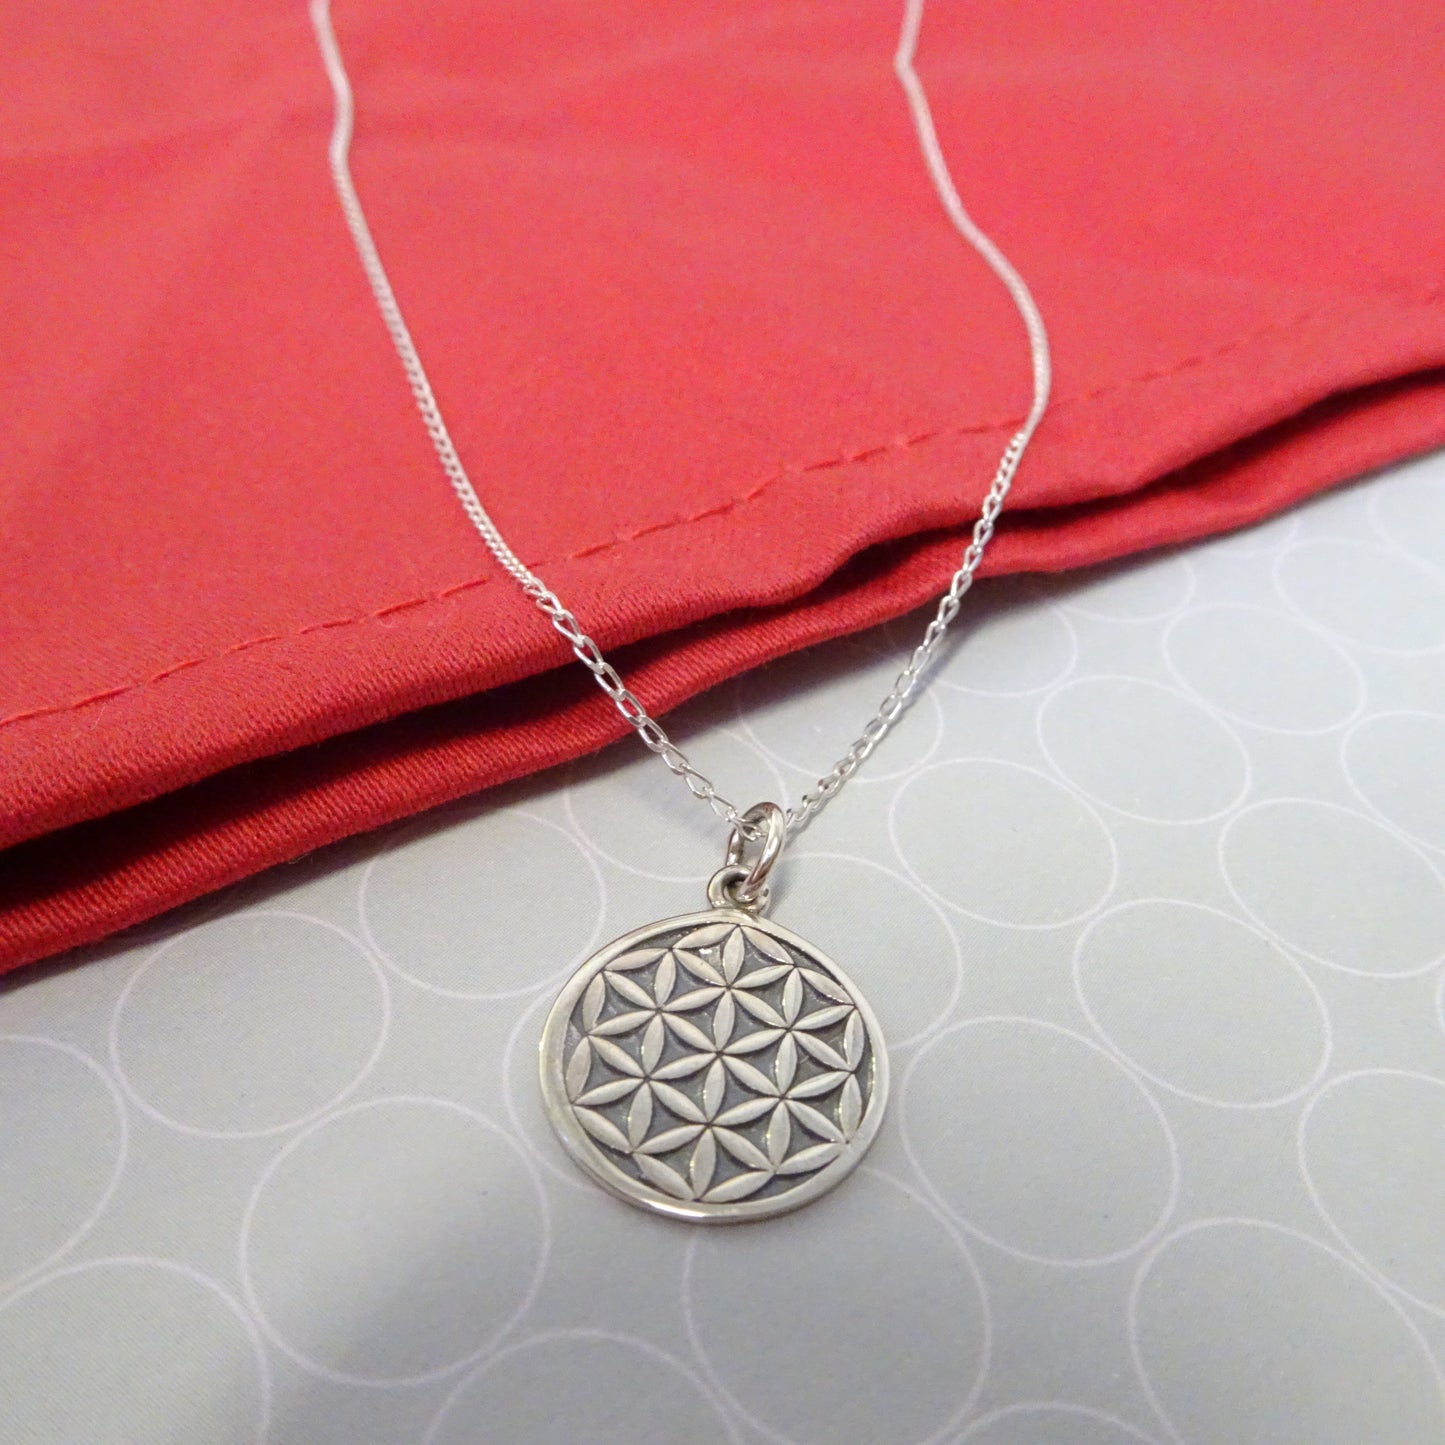 Sterling Silver Flower of Life Pendant Necklace 14 - 32 Inches